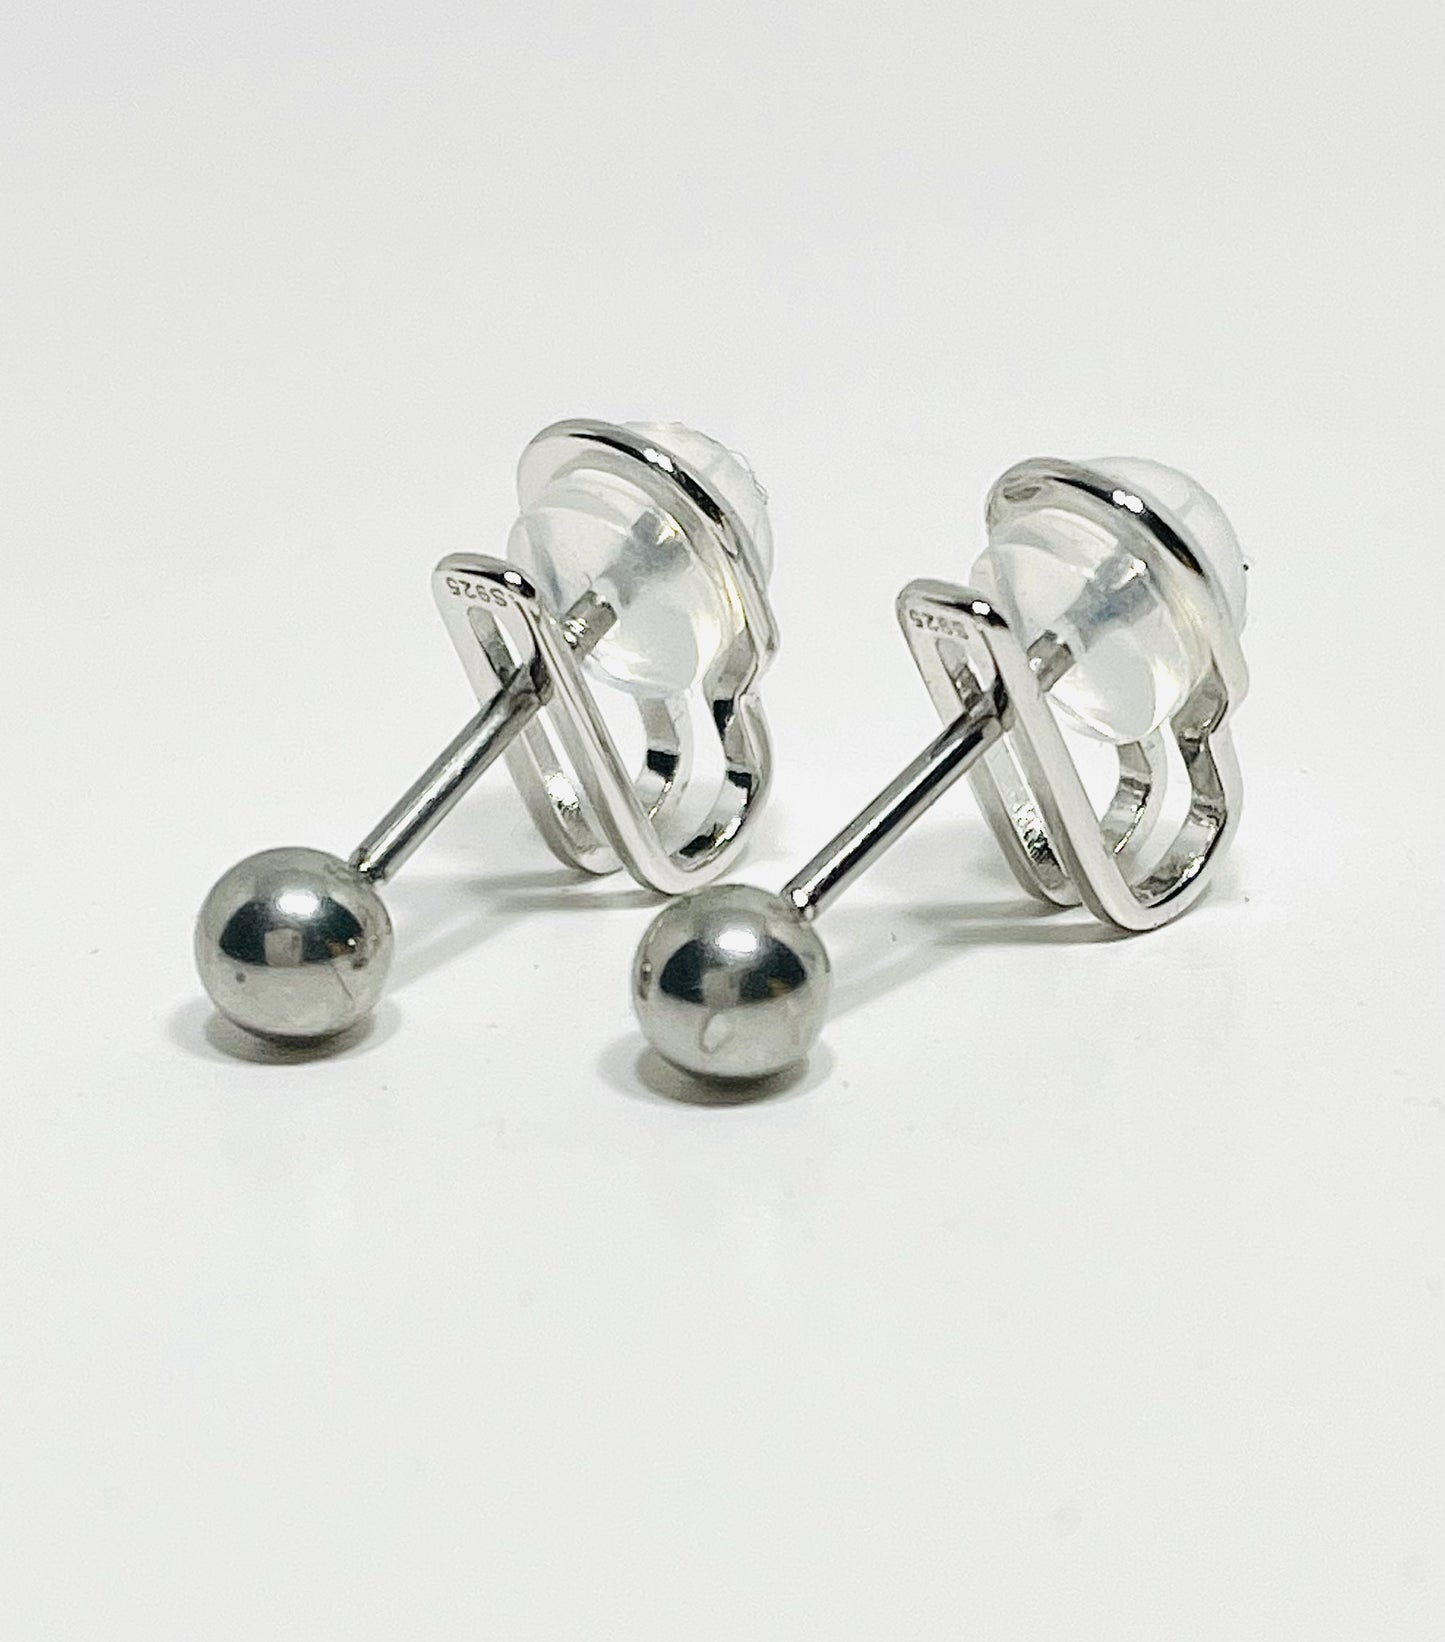 Universal Cling - Maxi Stainless Steel Ball Stud